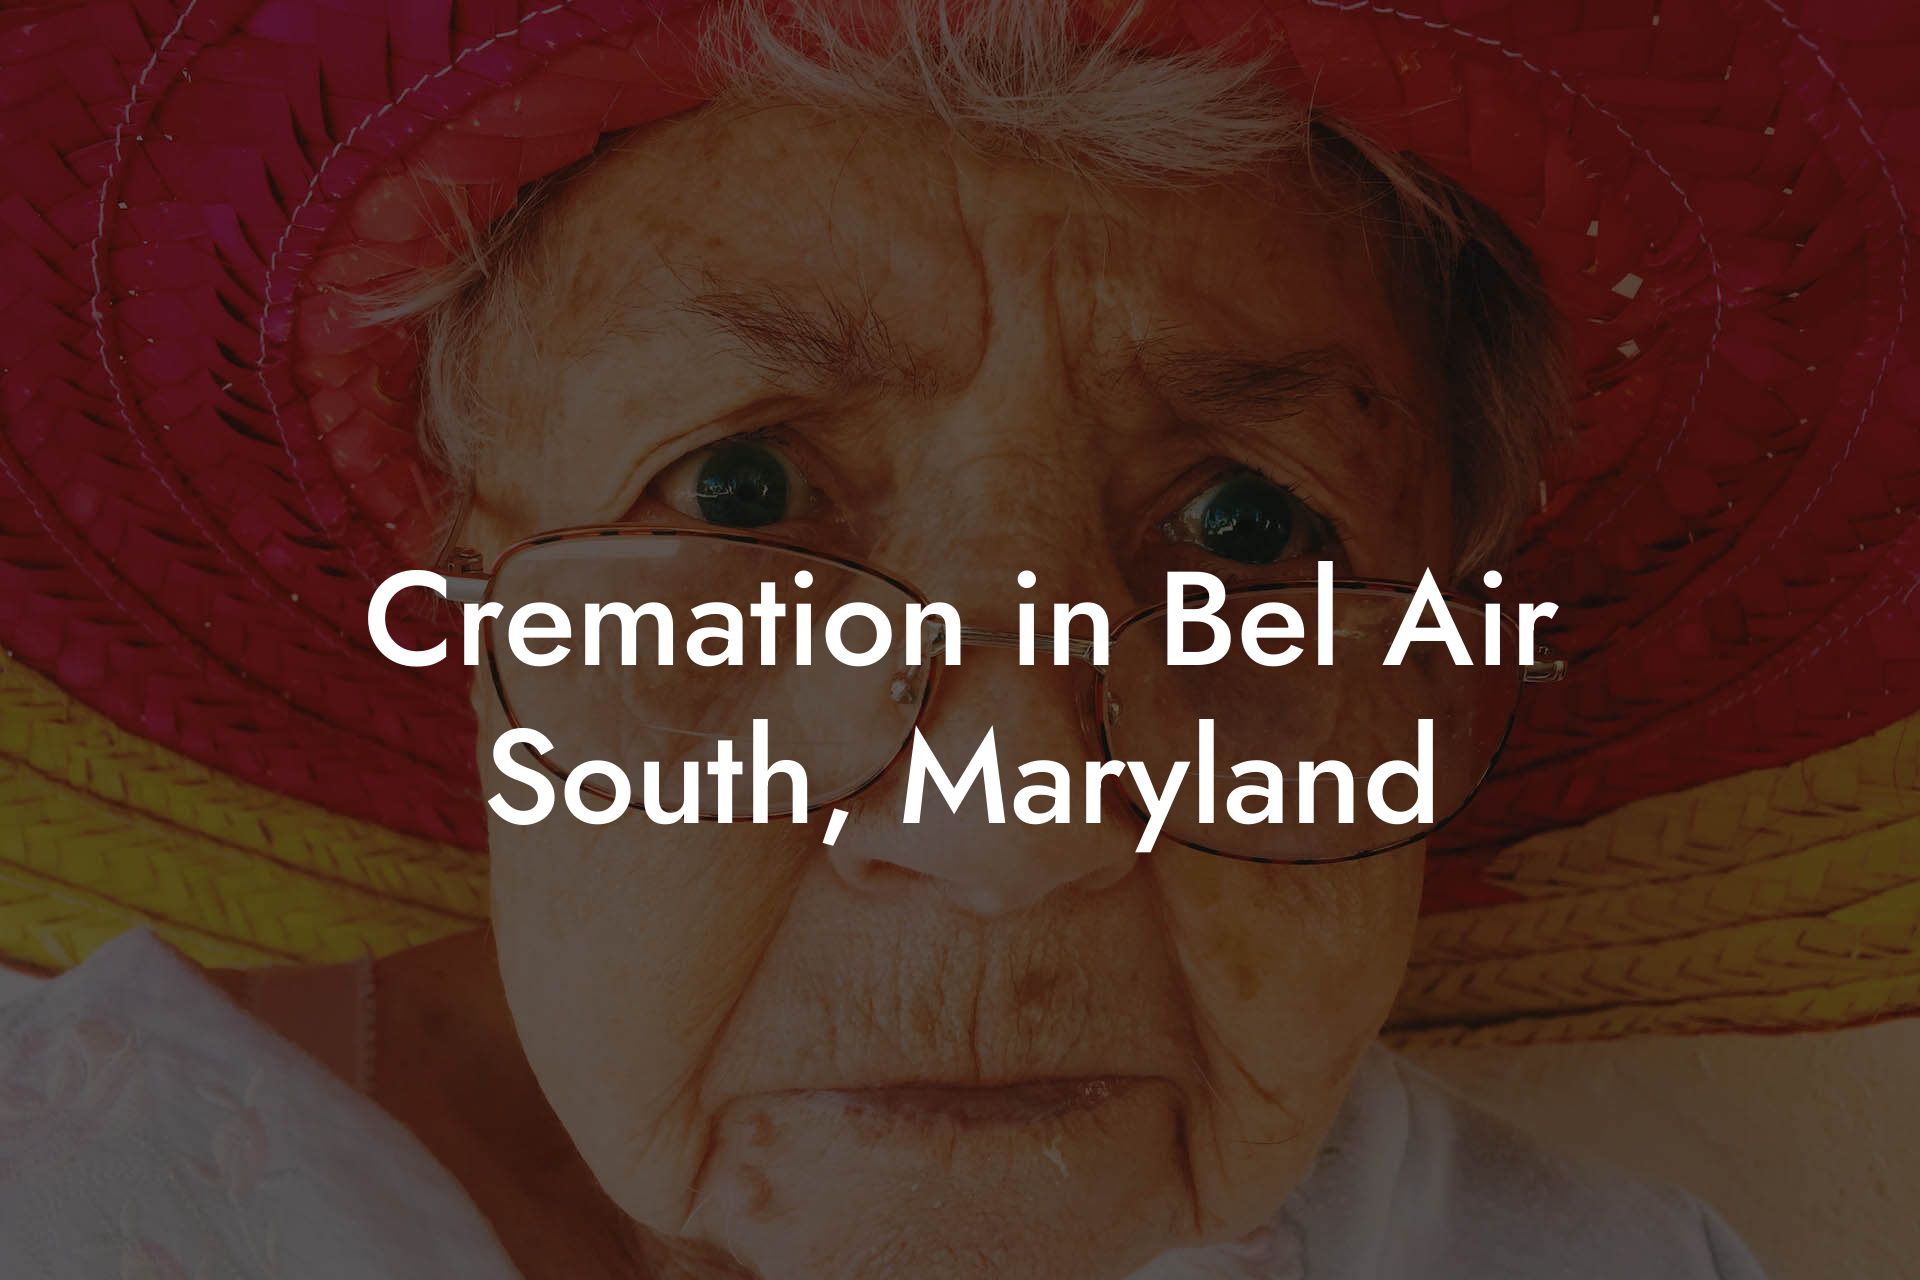 Cremation in Bel Air South, Maryland